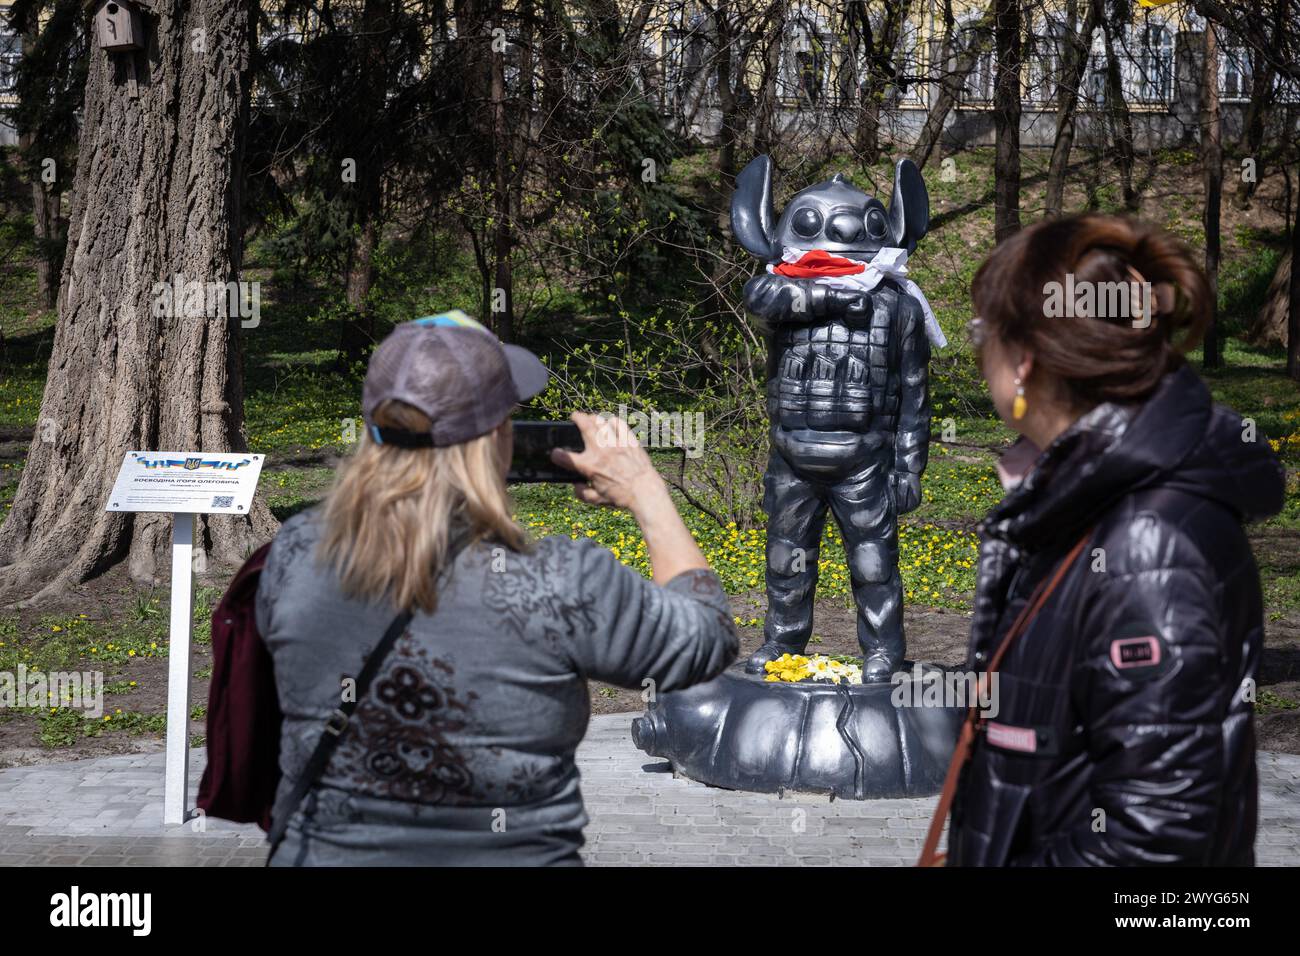 April 5, 2024, Kyiv, Ukraine: People take a pictures of a monument depicting the cartoon character Stitch from the cartoon 'Lilo and Stitch' in military uniform, erected in honor of the Ukrainian sniper Ihor Voevodin with nickname Stitch, who died in battles with the Russian army, in central Kyiv. Ukrainian student Ihor Voevodin volunteered for the front after the Russian invasion and served as a sniper in Azov regiment. Ihor Voevodin was killed in August 2023 on a combat mission in Luhansk region, Ukraine. (Credit Image: © Oleksii Chumachenko/SOPA Images via ZUMA Press Wire) EDITORIAL USAGE O Stock Photo